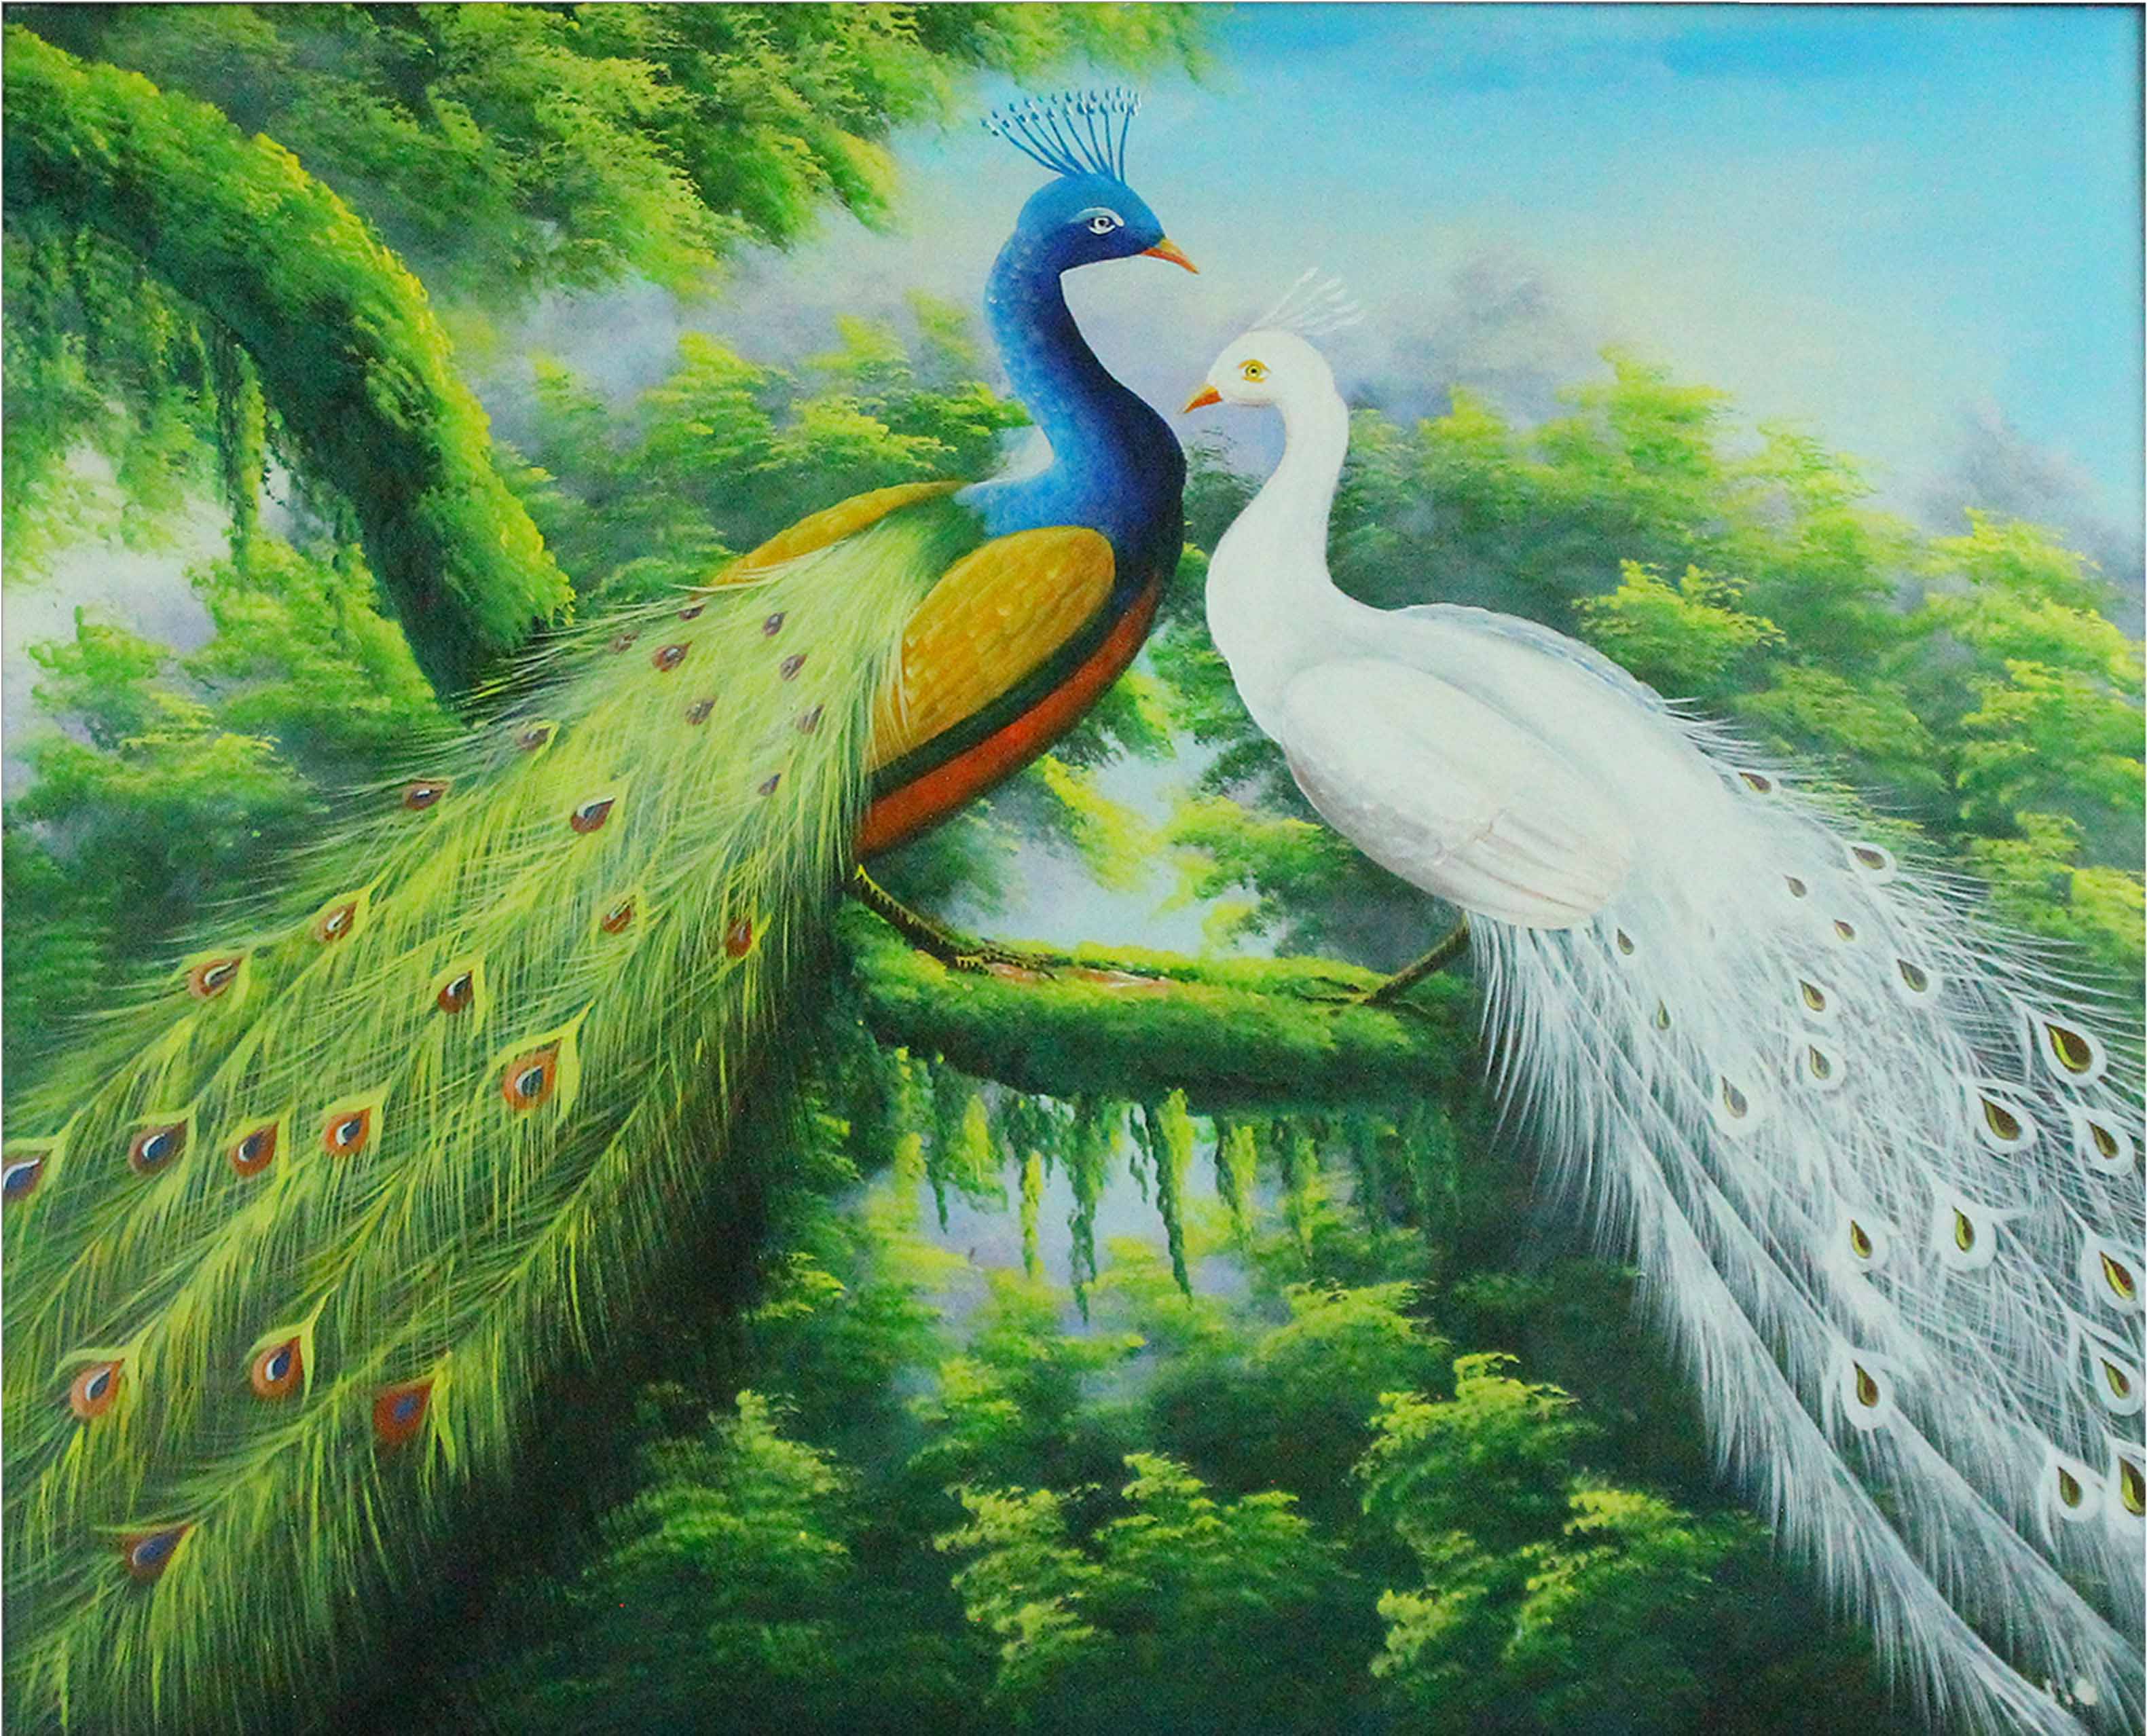 Oil painting about animals - TSD2LHAR